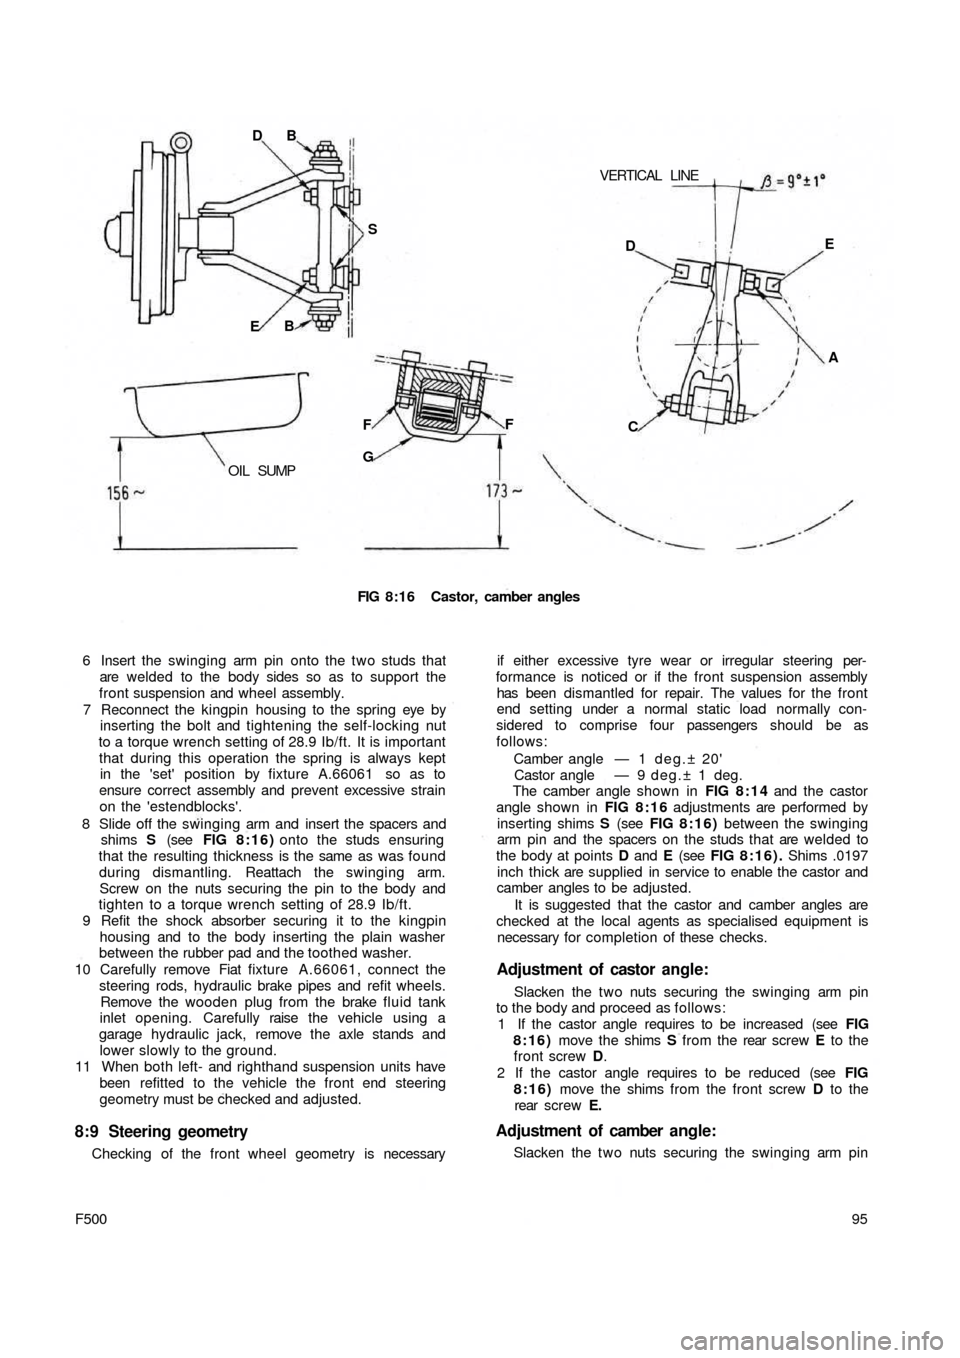 FIAT 500 1967 1.G Workshop Manual VERTICAL  LINE DB
S
EB
OIL  SUMPF
GF
FIG 8:16 Castor, camber angles
6 Insert the swinging arm pin onto the two studs that
are welded  to the  body sides so as to support the
front suspension and wheel